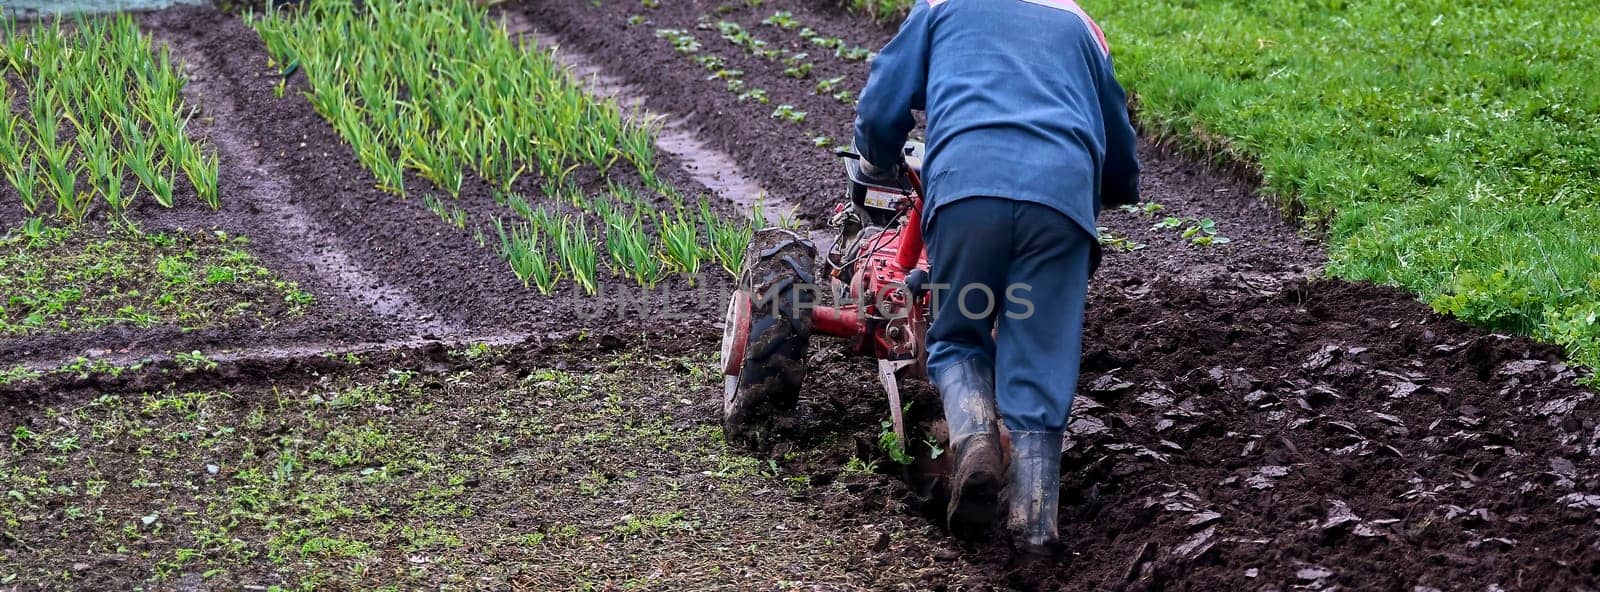 An aged red tractor plowing a vast rural field, preparing the rich soil for planting. Farmer in denim overalls guiding the tractor through fertile land on a sunny day.